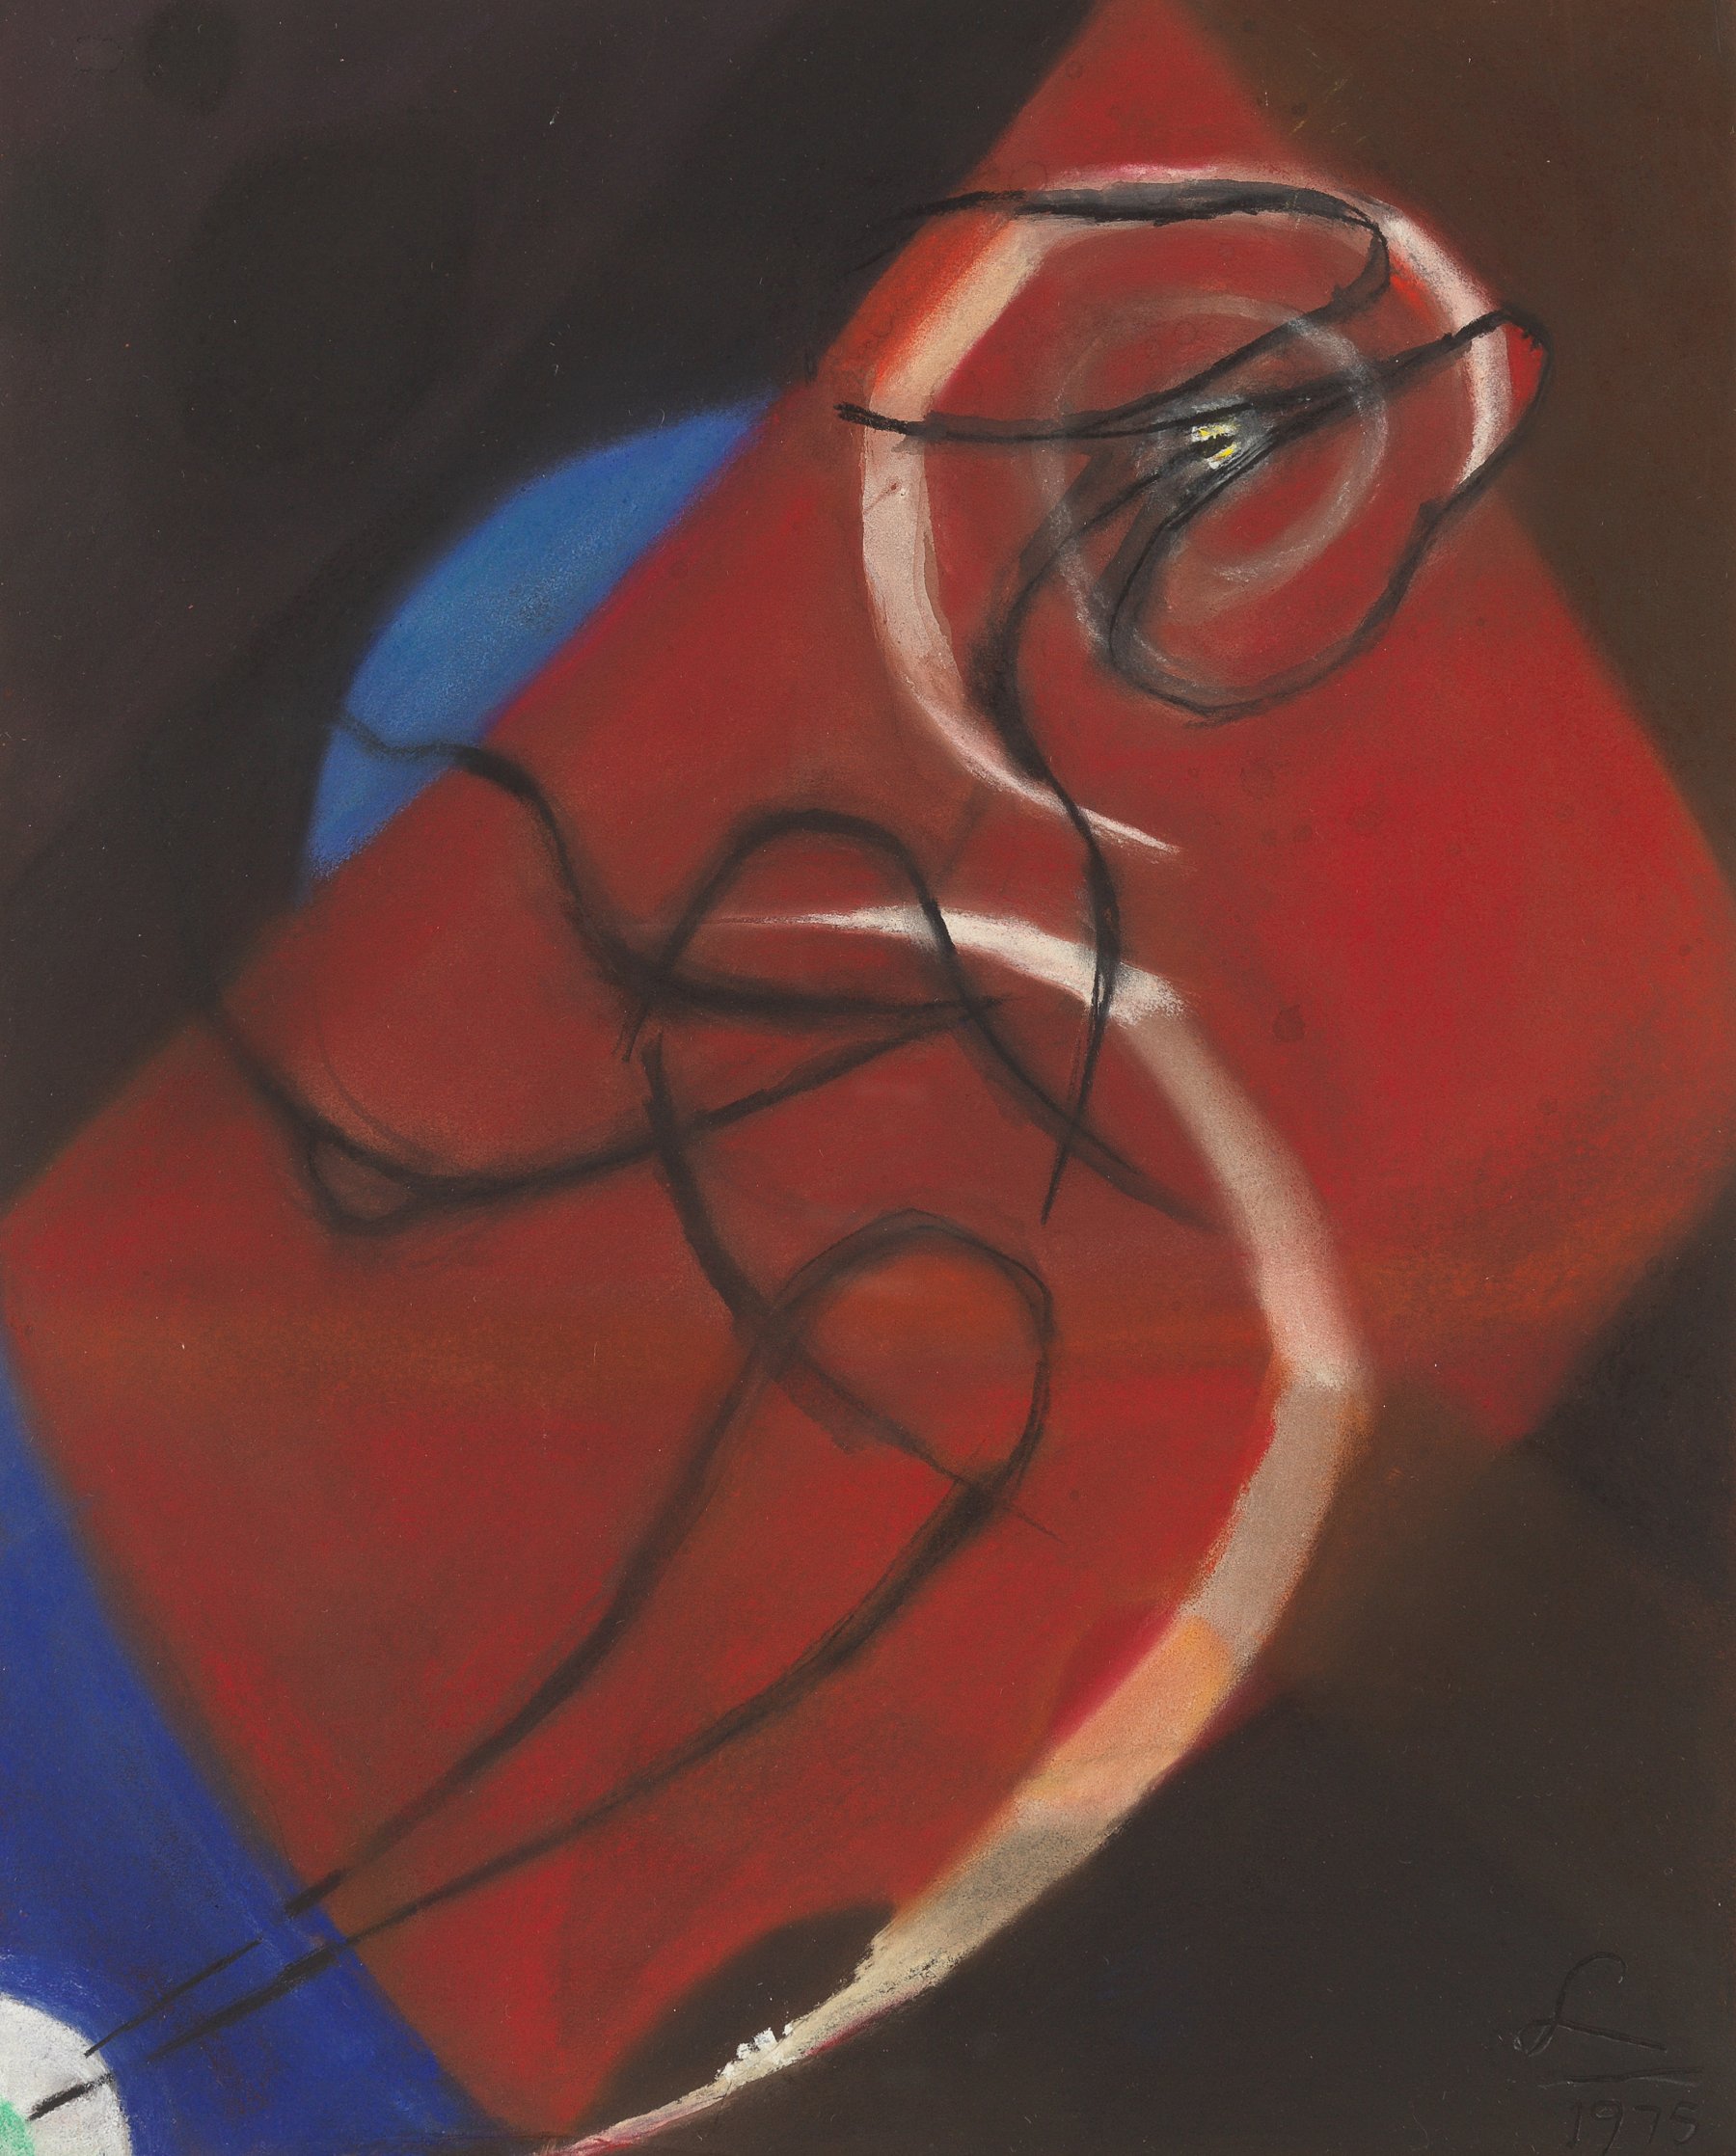 Frank Lobdell, Pastel Study for Painting No. 3, 1975